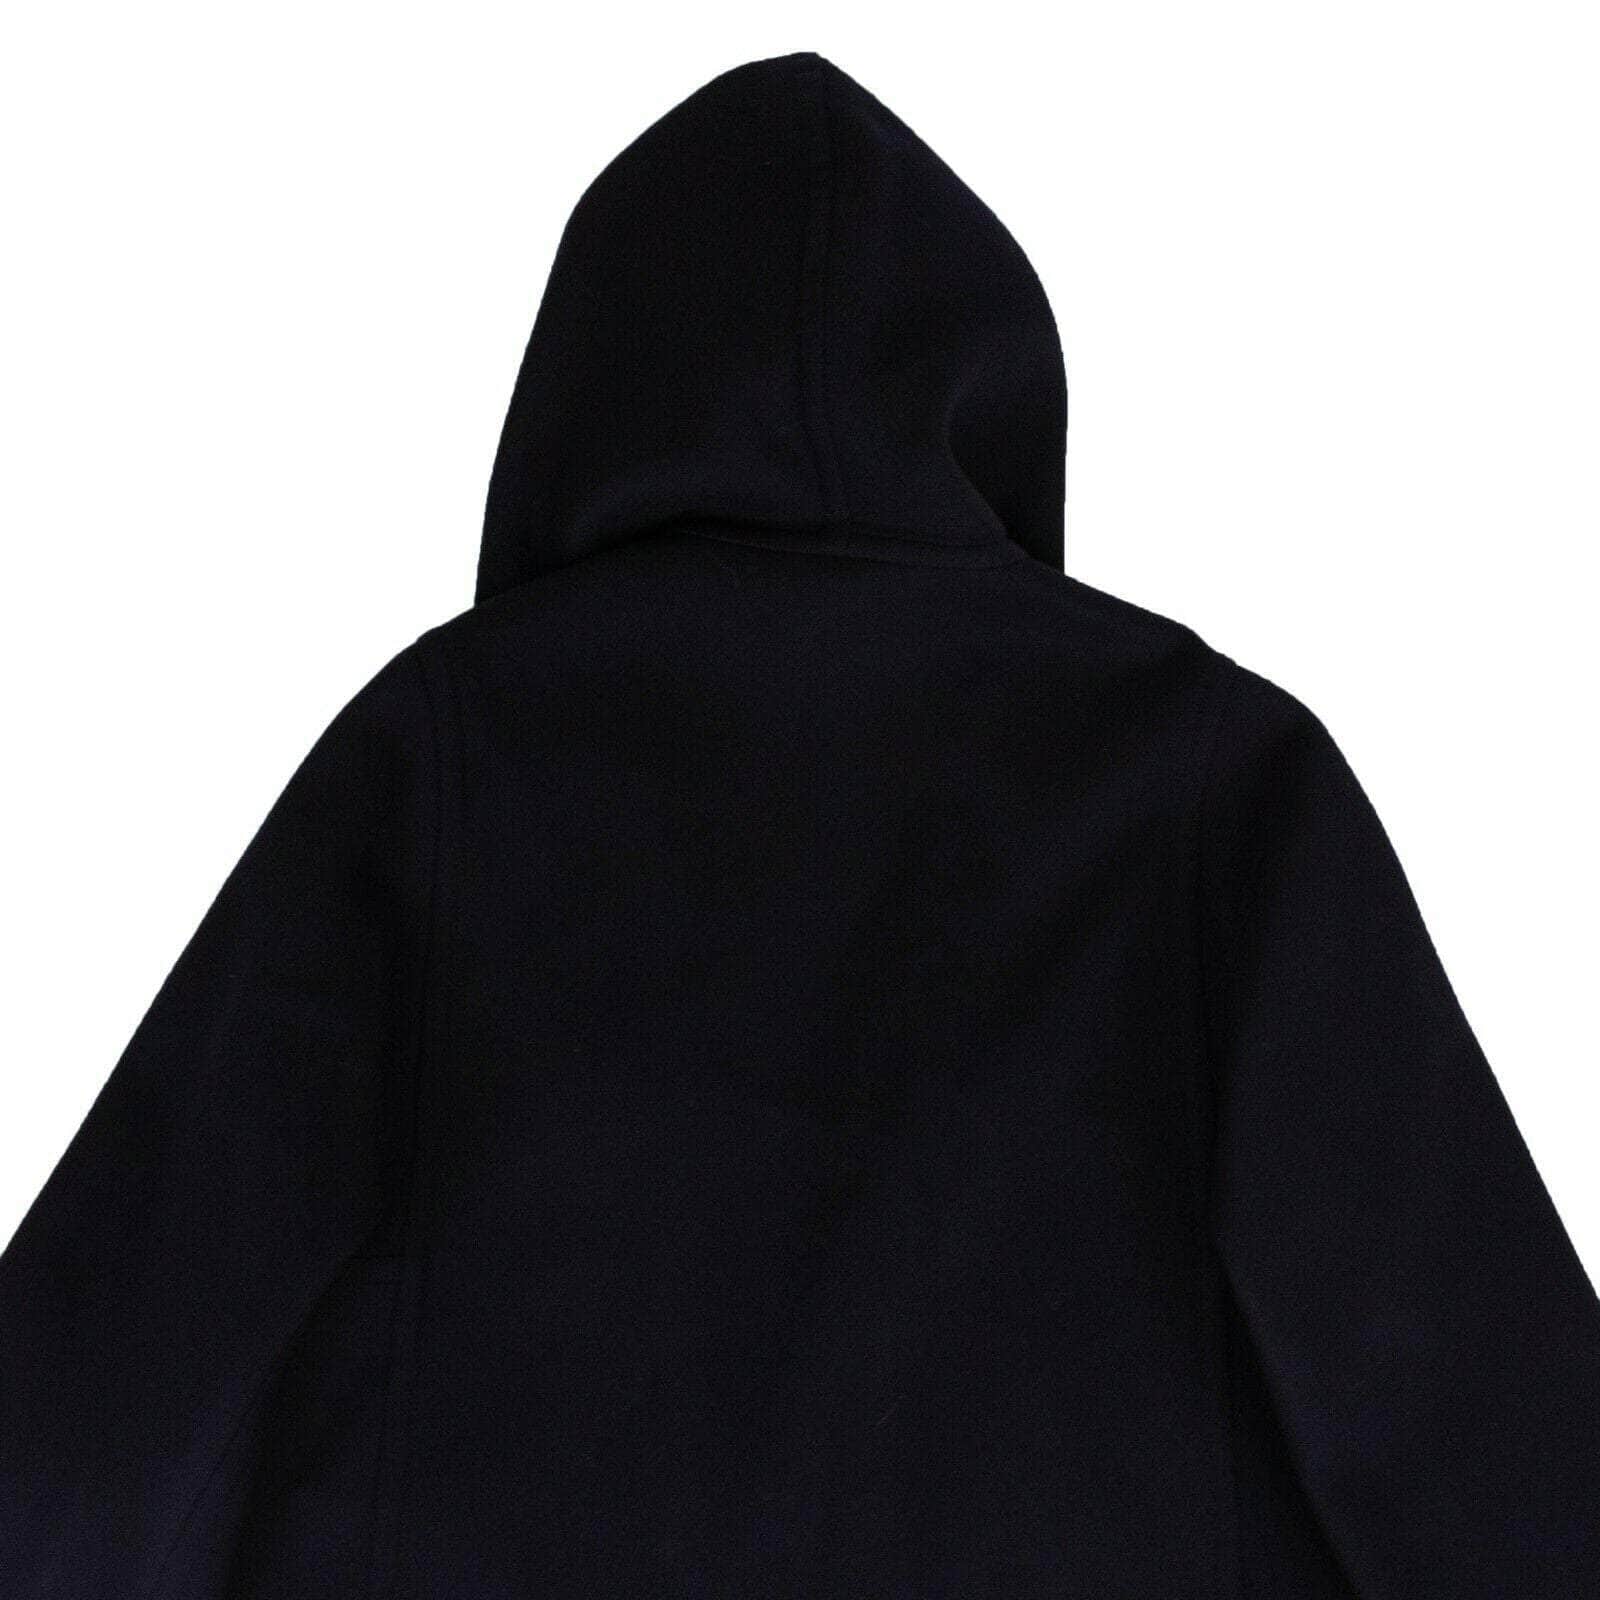 A_PLAN_APPLICATION 750-1000, a_plan_application, channelenable-all, couponcollection, gender-womens, main-clothing, size-s, womens-coats S Navy Blue Hooded Oversized Coat 82NGG-AP-36/S 82NGG-AP-36/S